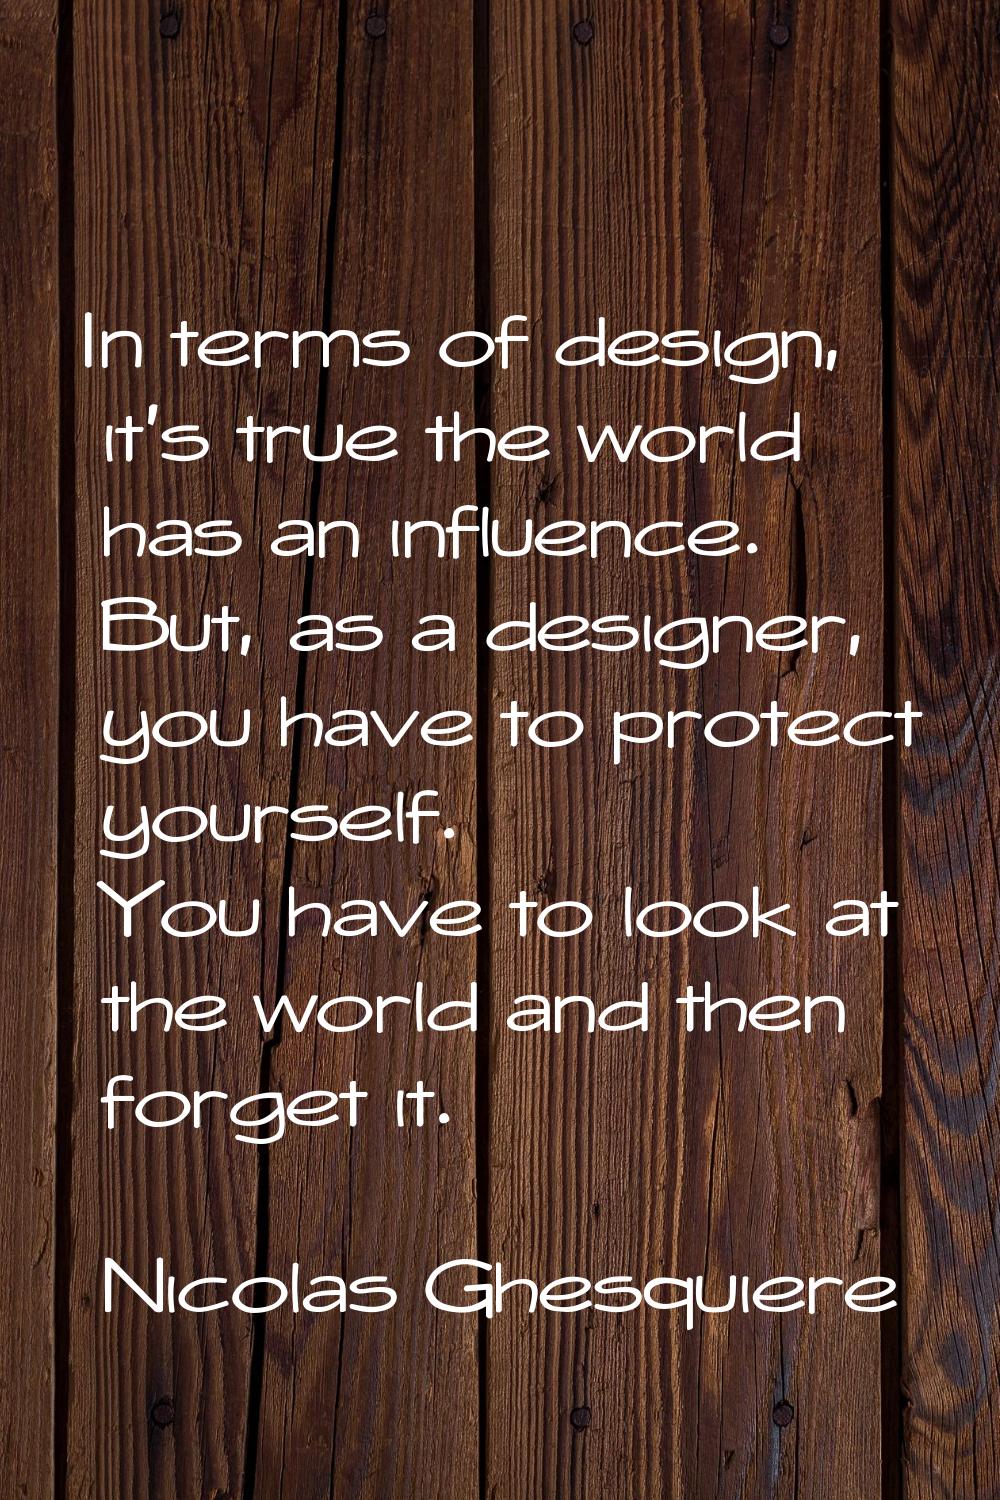 In terms of design, it's true the world has an influence. But, as a designer, you have to protect y